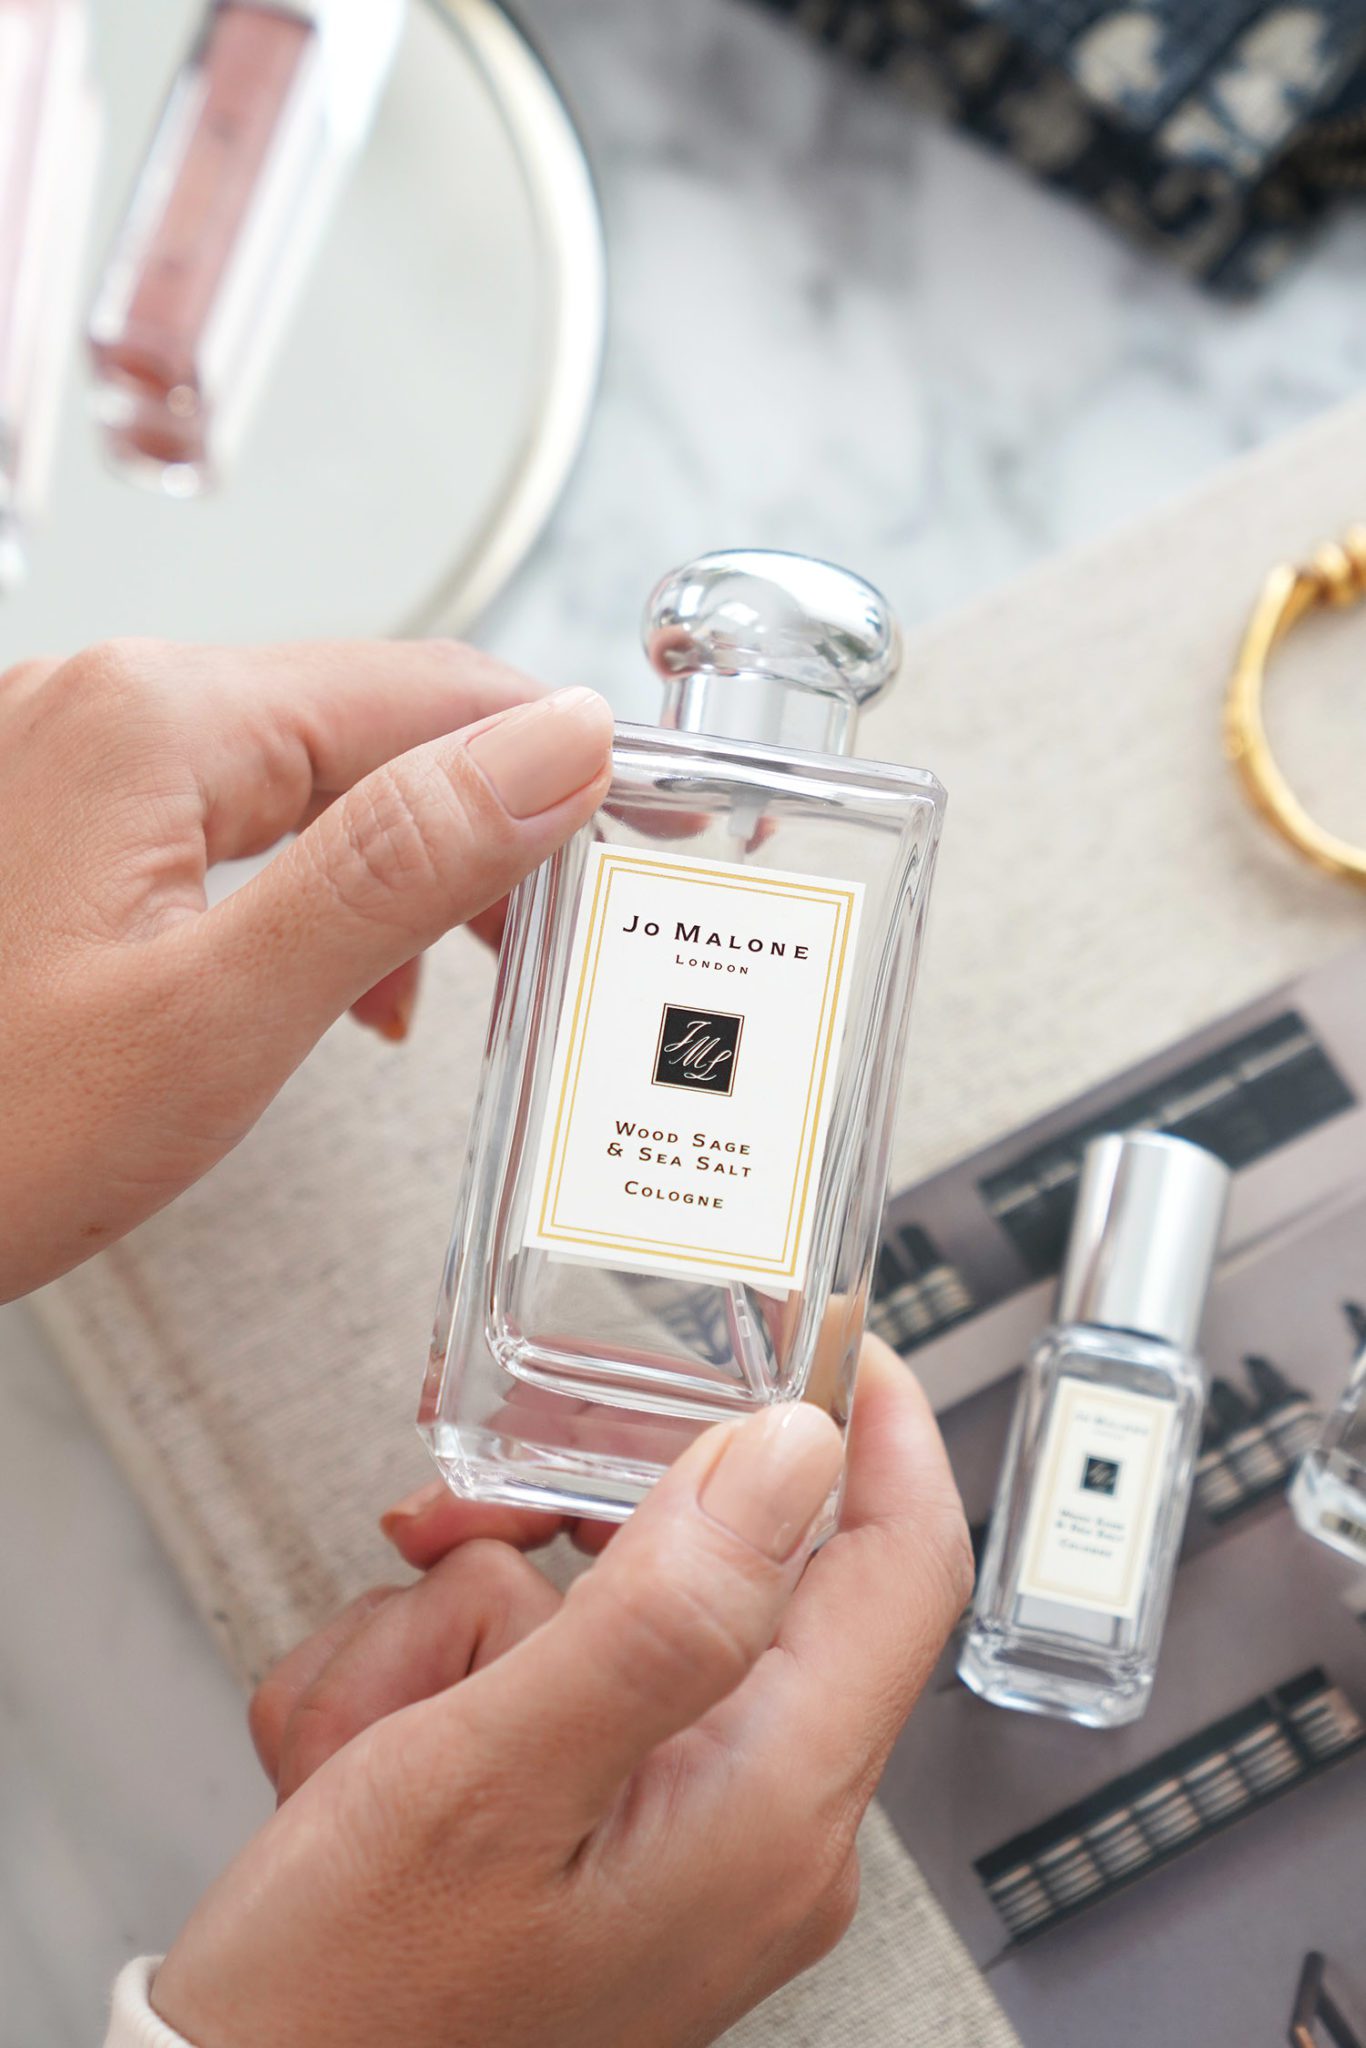 Top 5 Perfumes I'm Loving Right Now - The Beauty Look Book